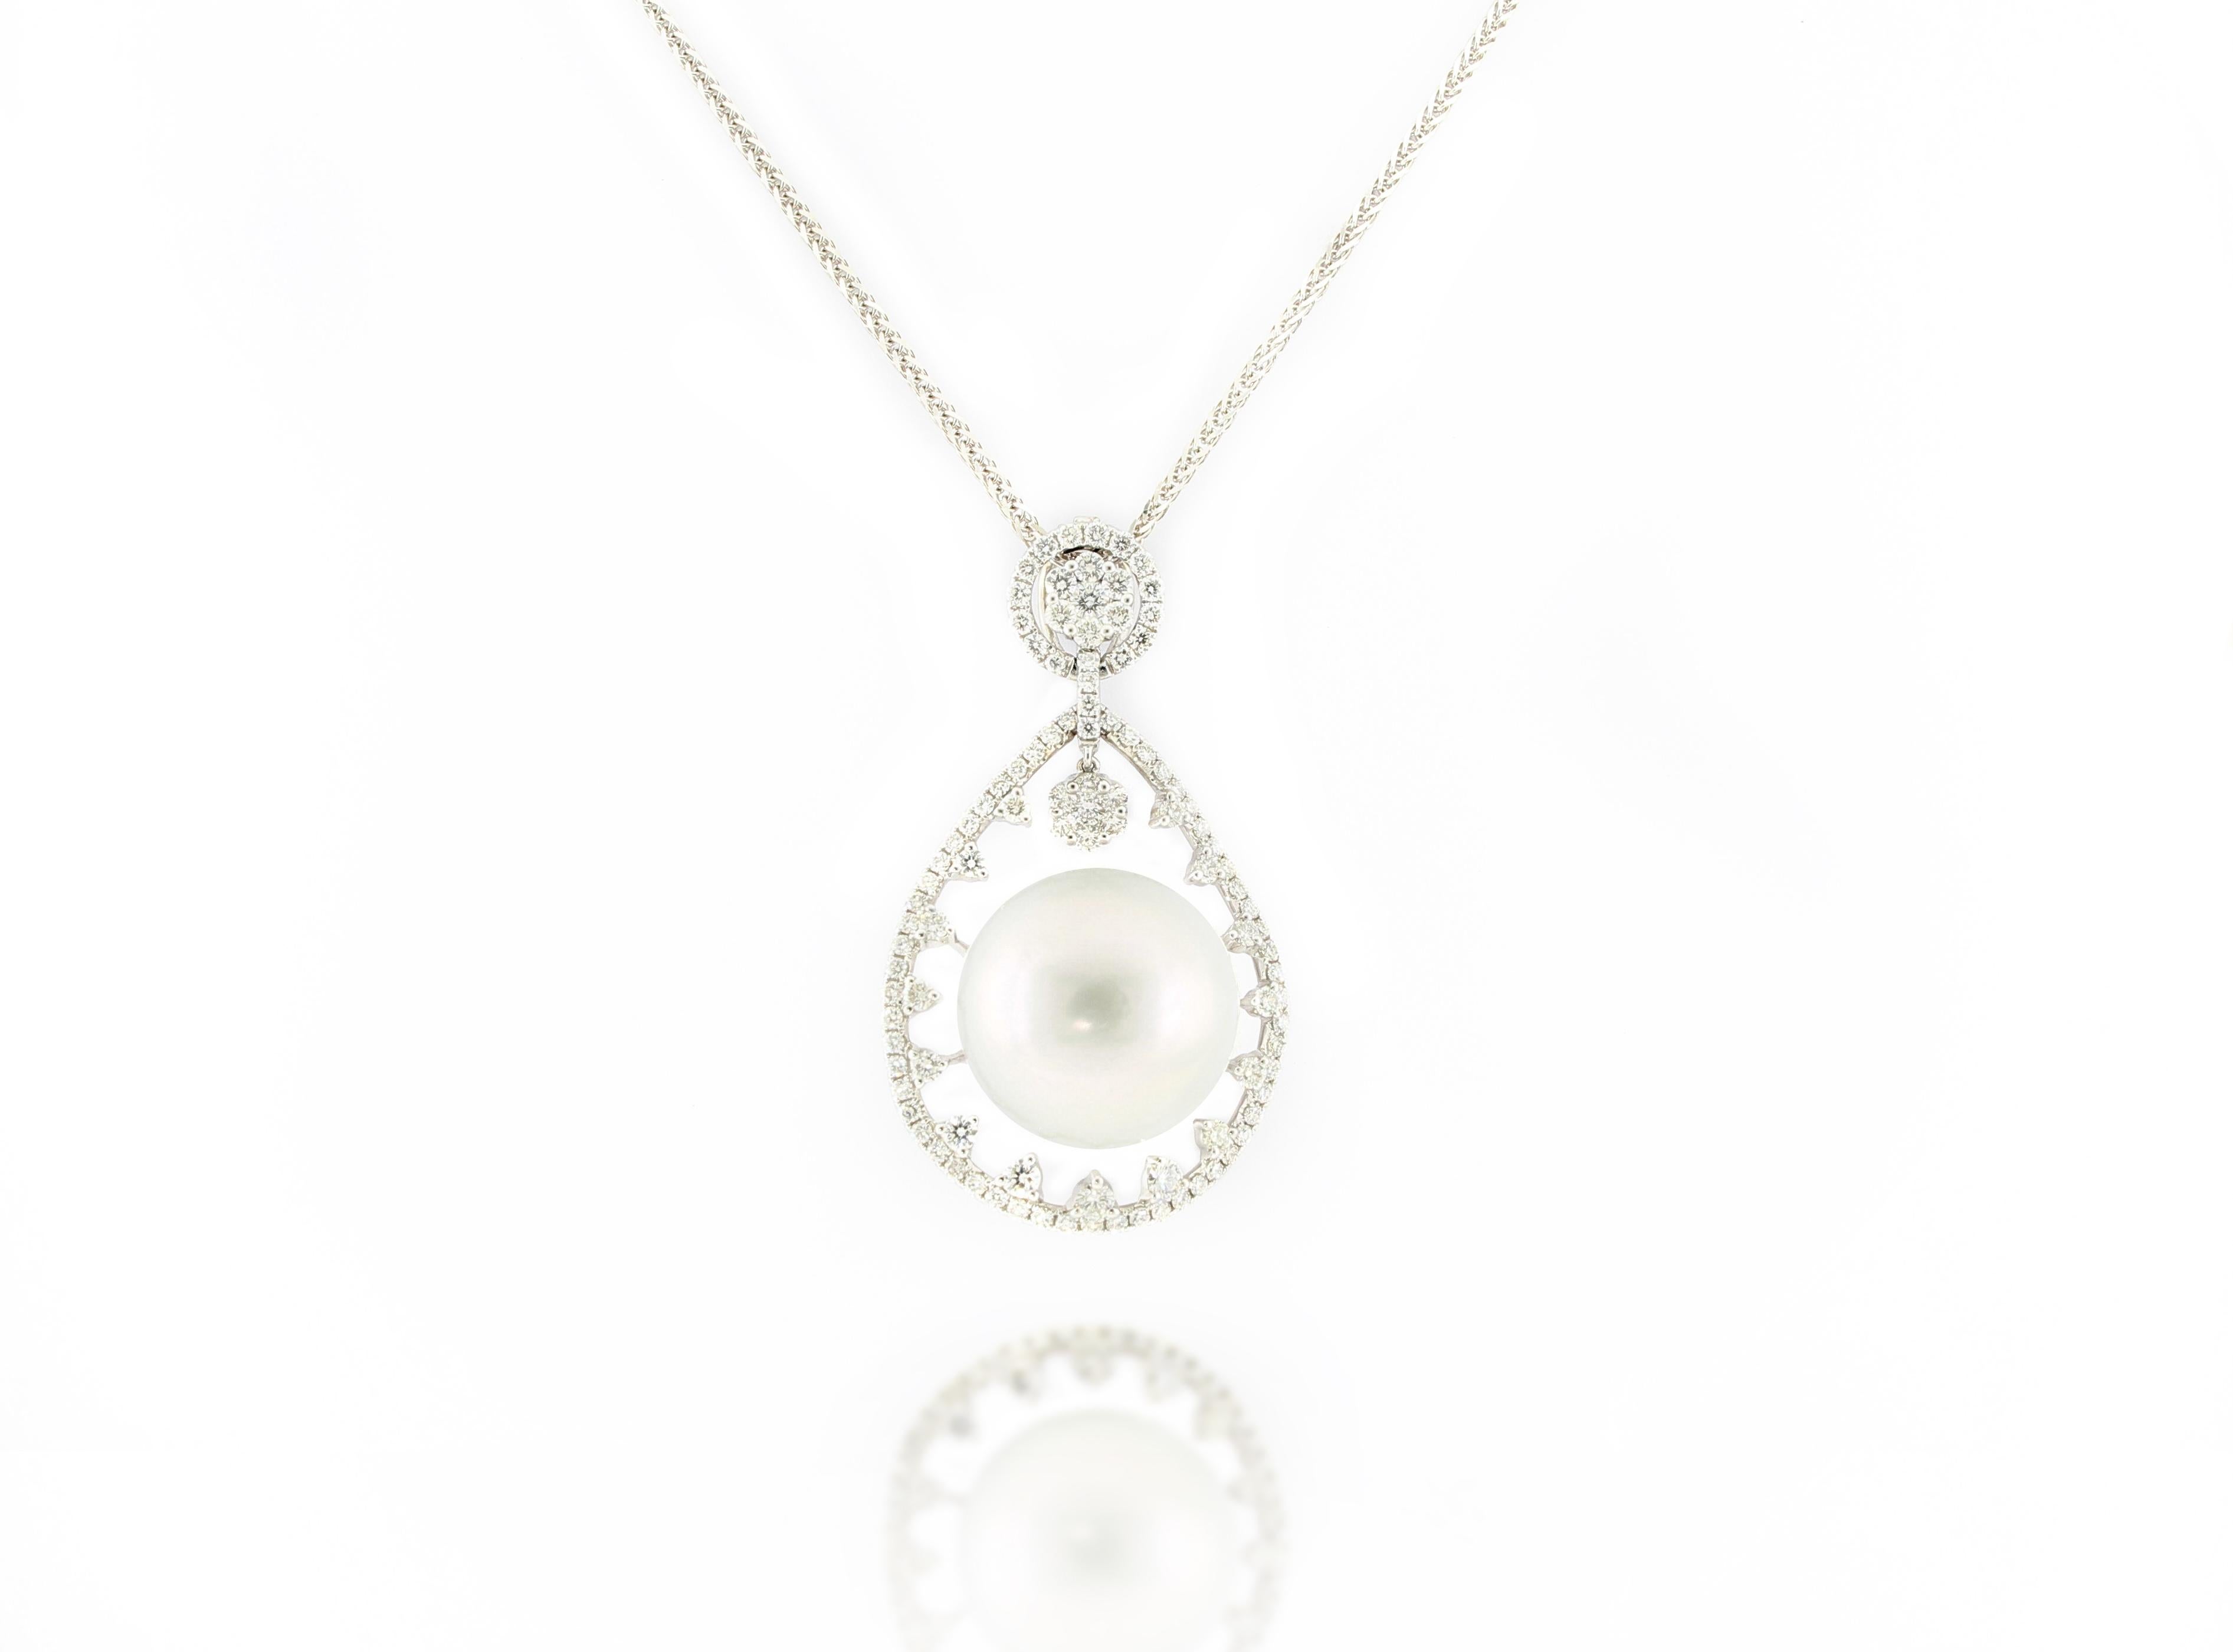 A very rare 18mm huge South Sea white pearl pendant, decorated with brilliant cut diamonds weighing 2.01 carats in total, mounted in 18 karat white gold. 
The brand was founded one and a half centuries ago in Macau and is renowned for its high